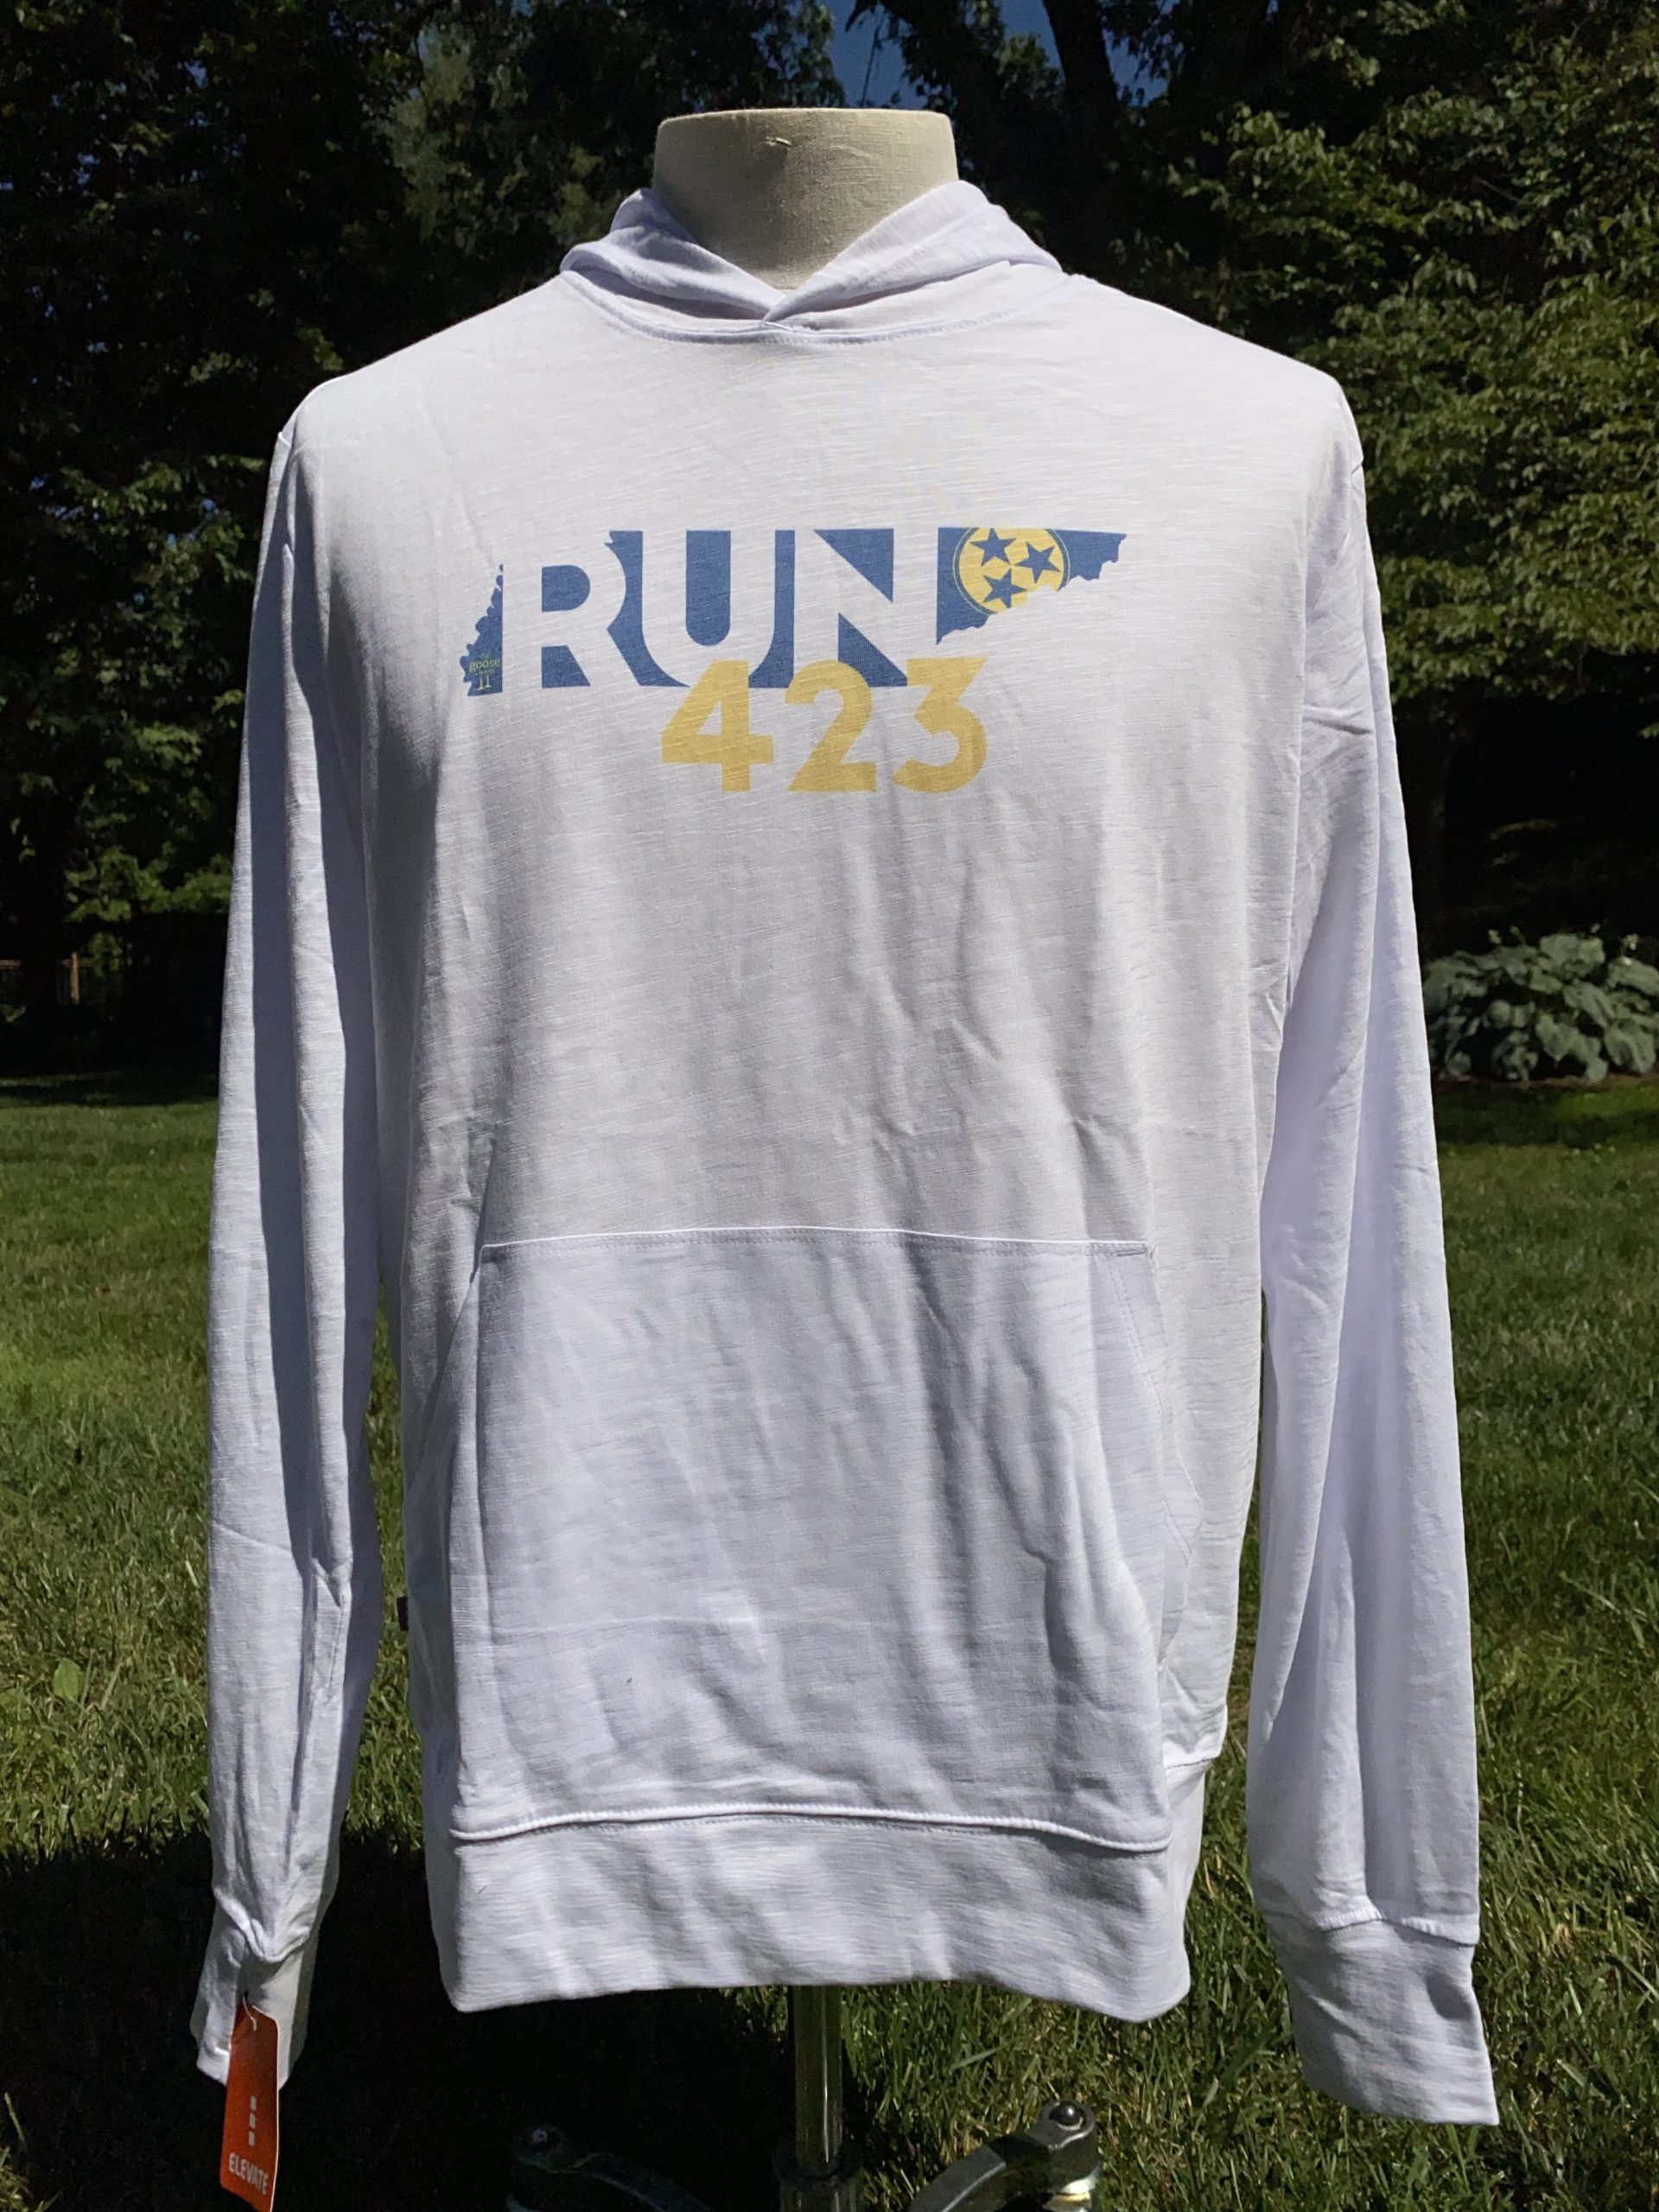 Run 423 White Knit Hoody – The Goose Chase